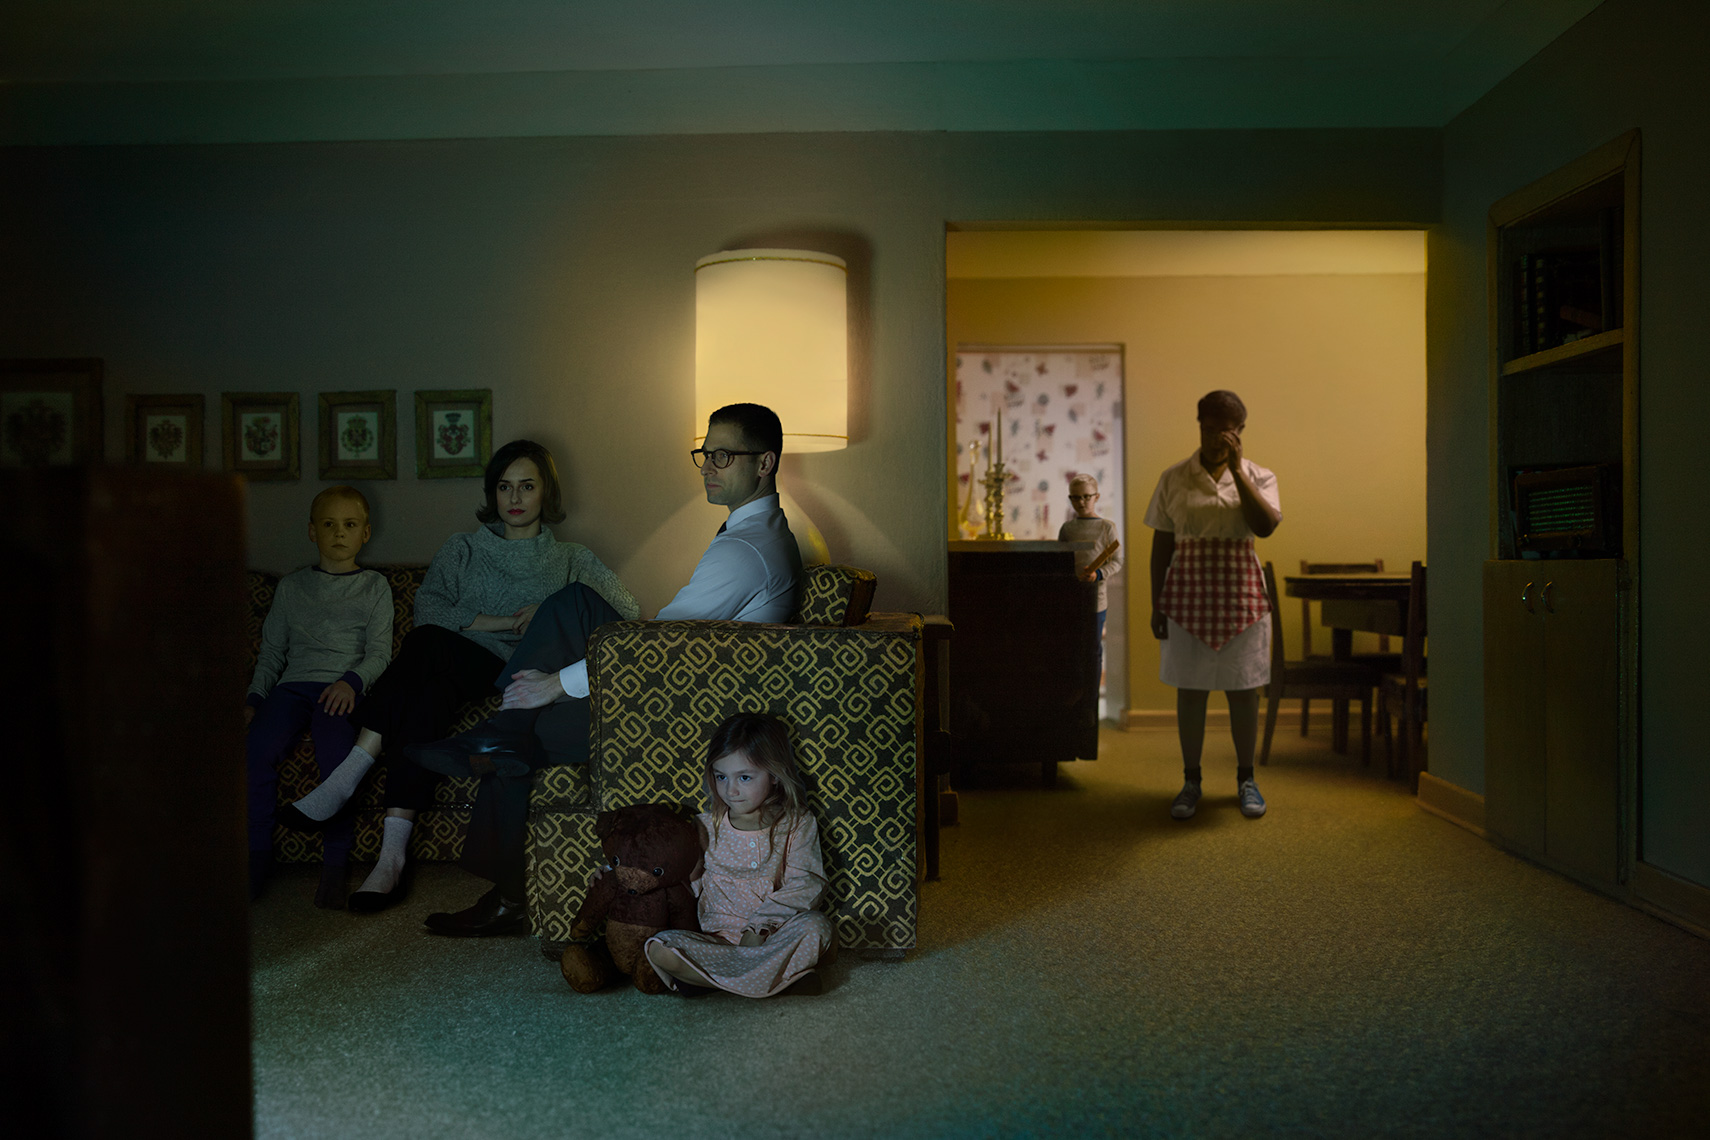 Re-creation of 1960s white suburban family watching TV in the evening while African-American housekeeper looks on in the background.